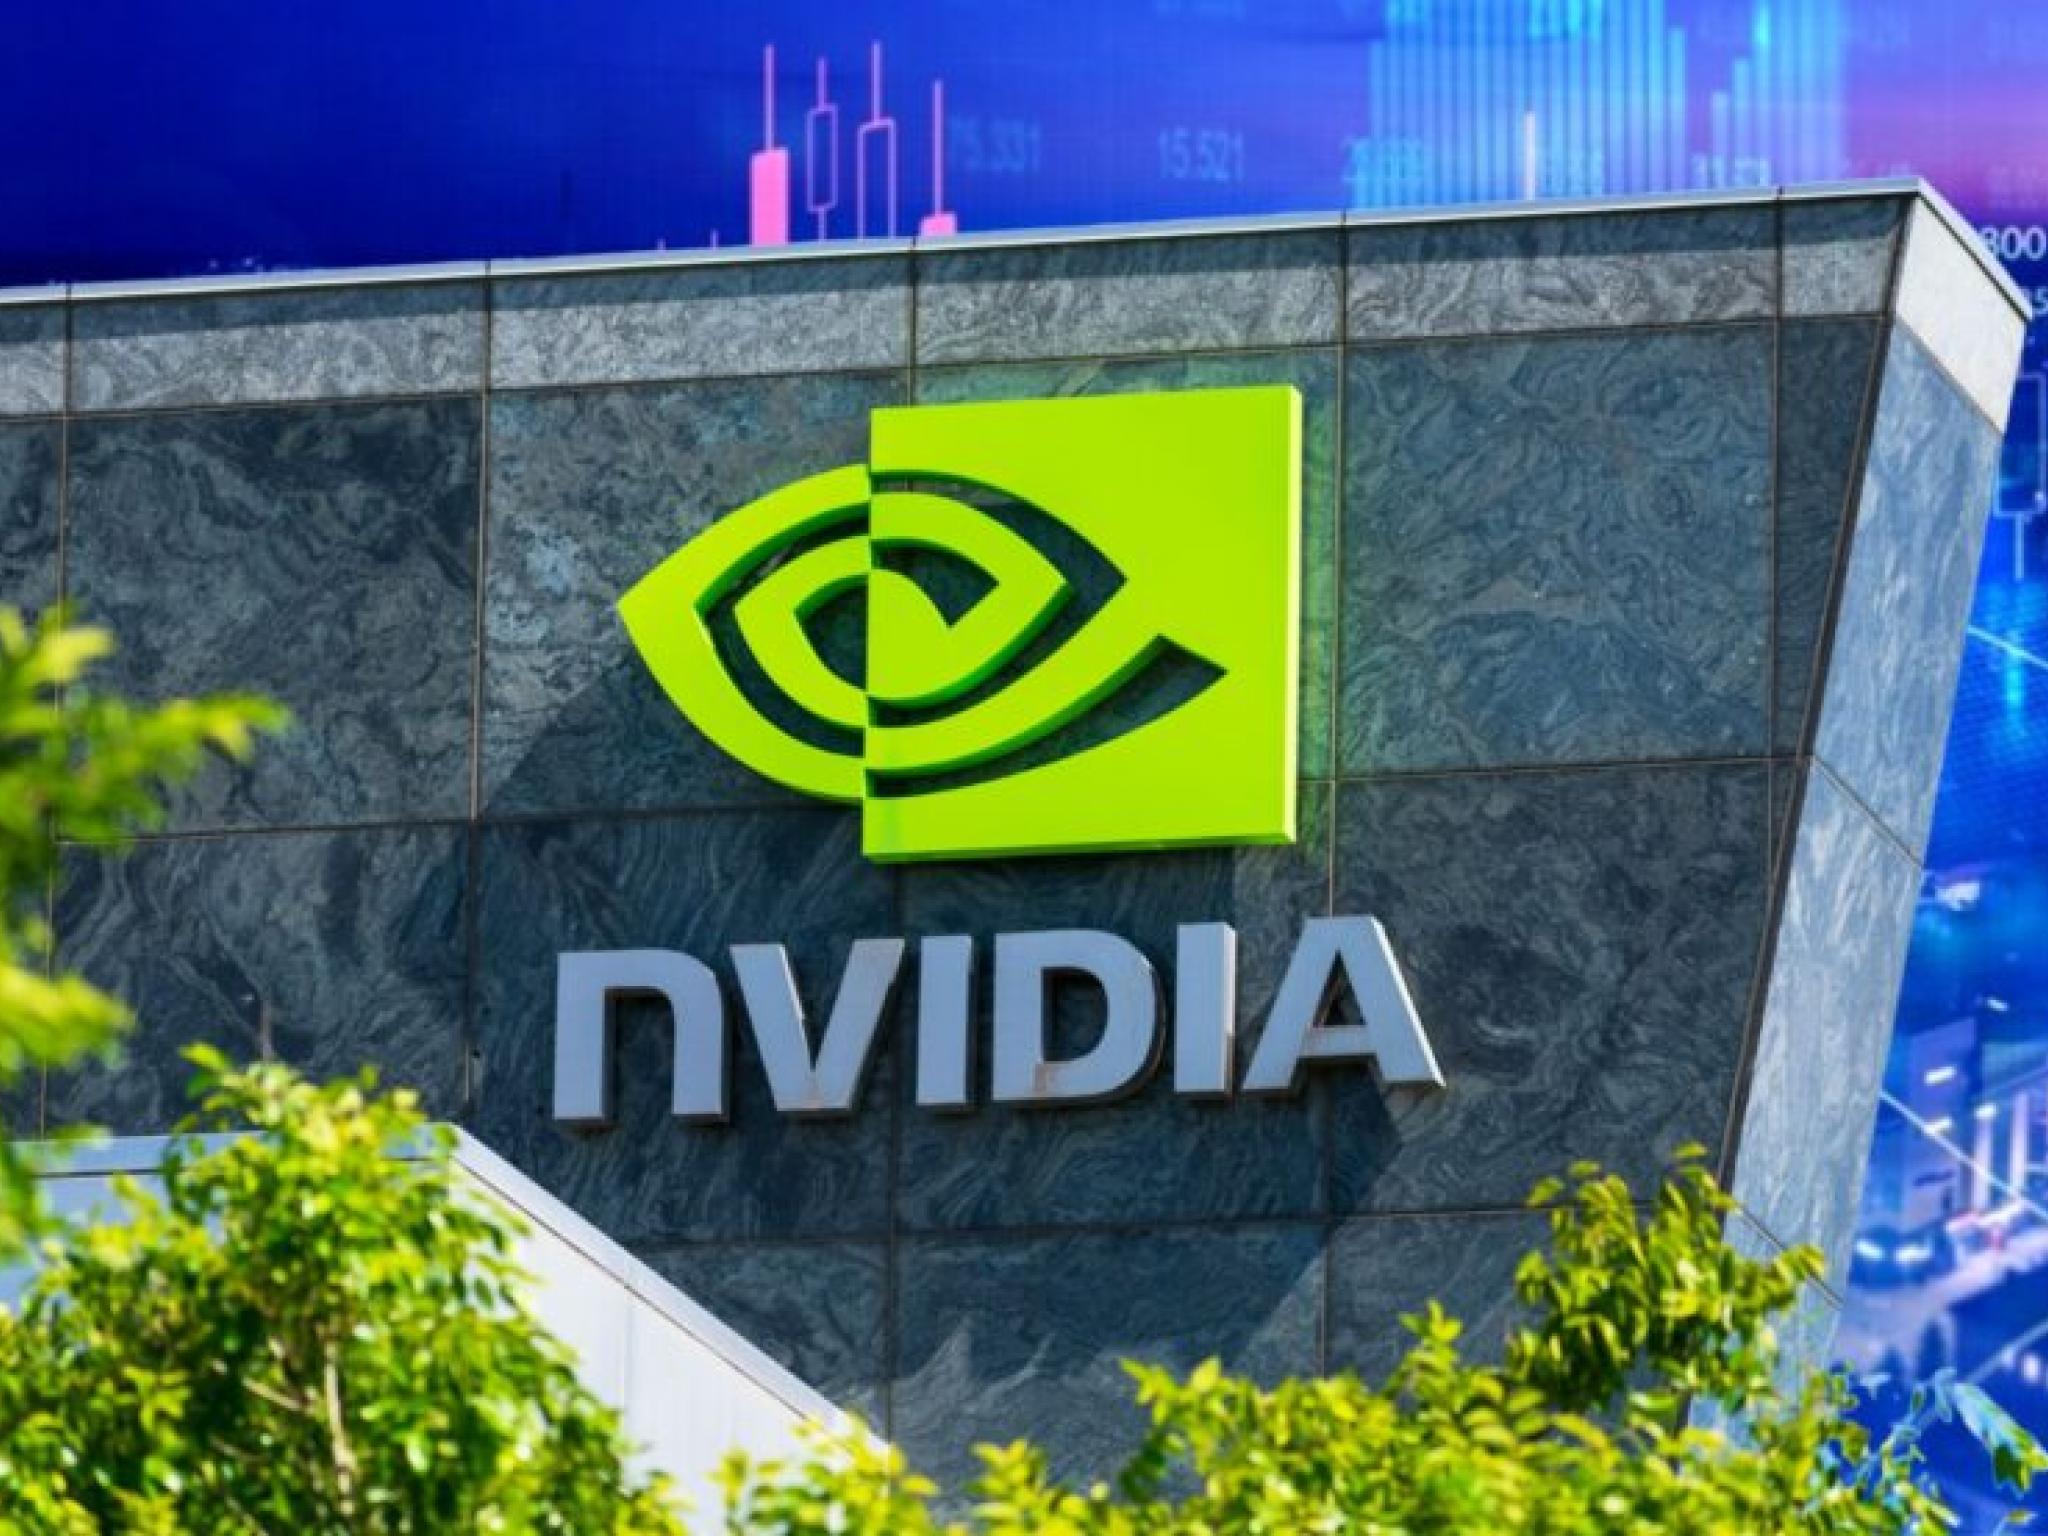  nvidia-stock-drops-over-12-in-3-trading-days-indicators-suggest-whats-next 